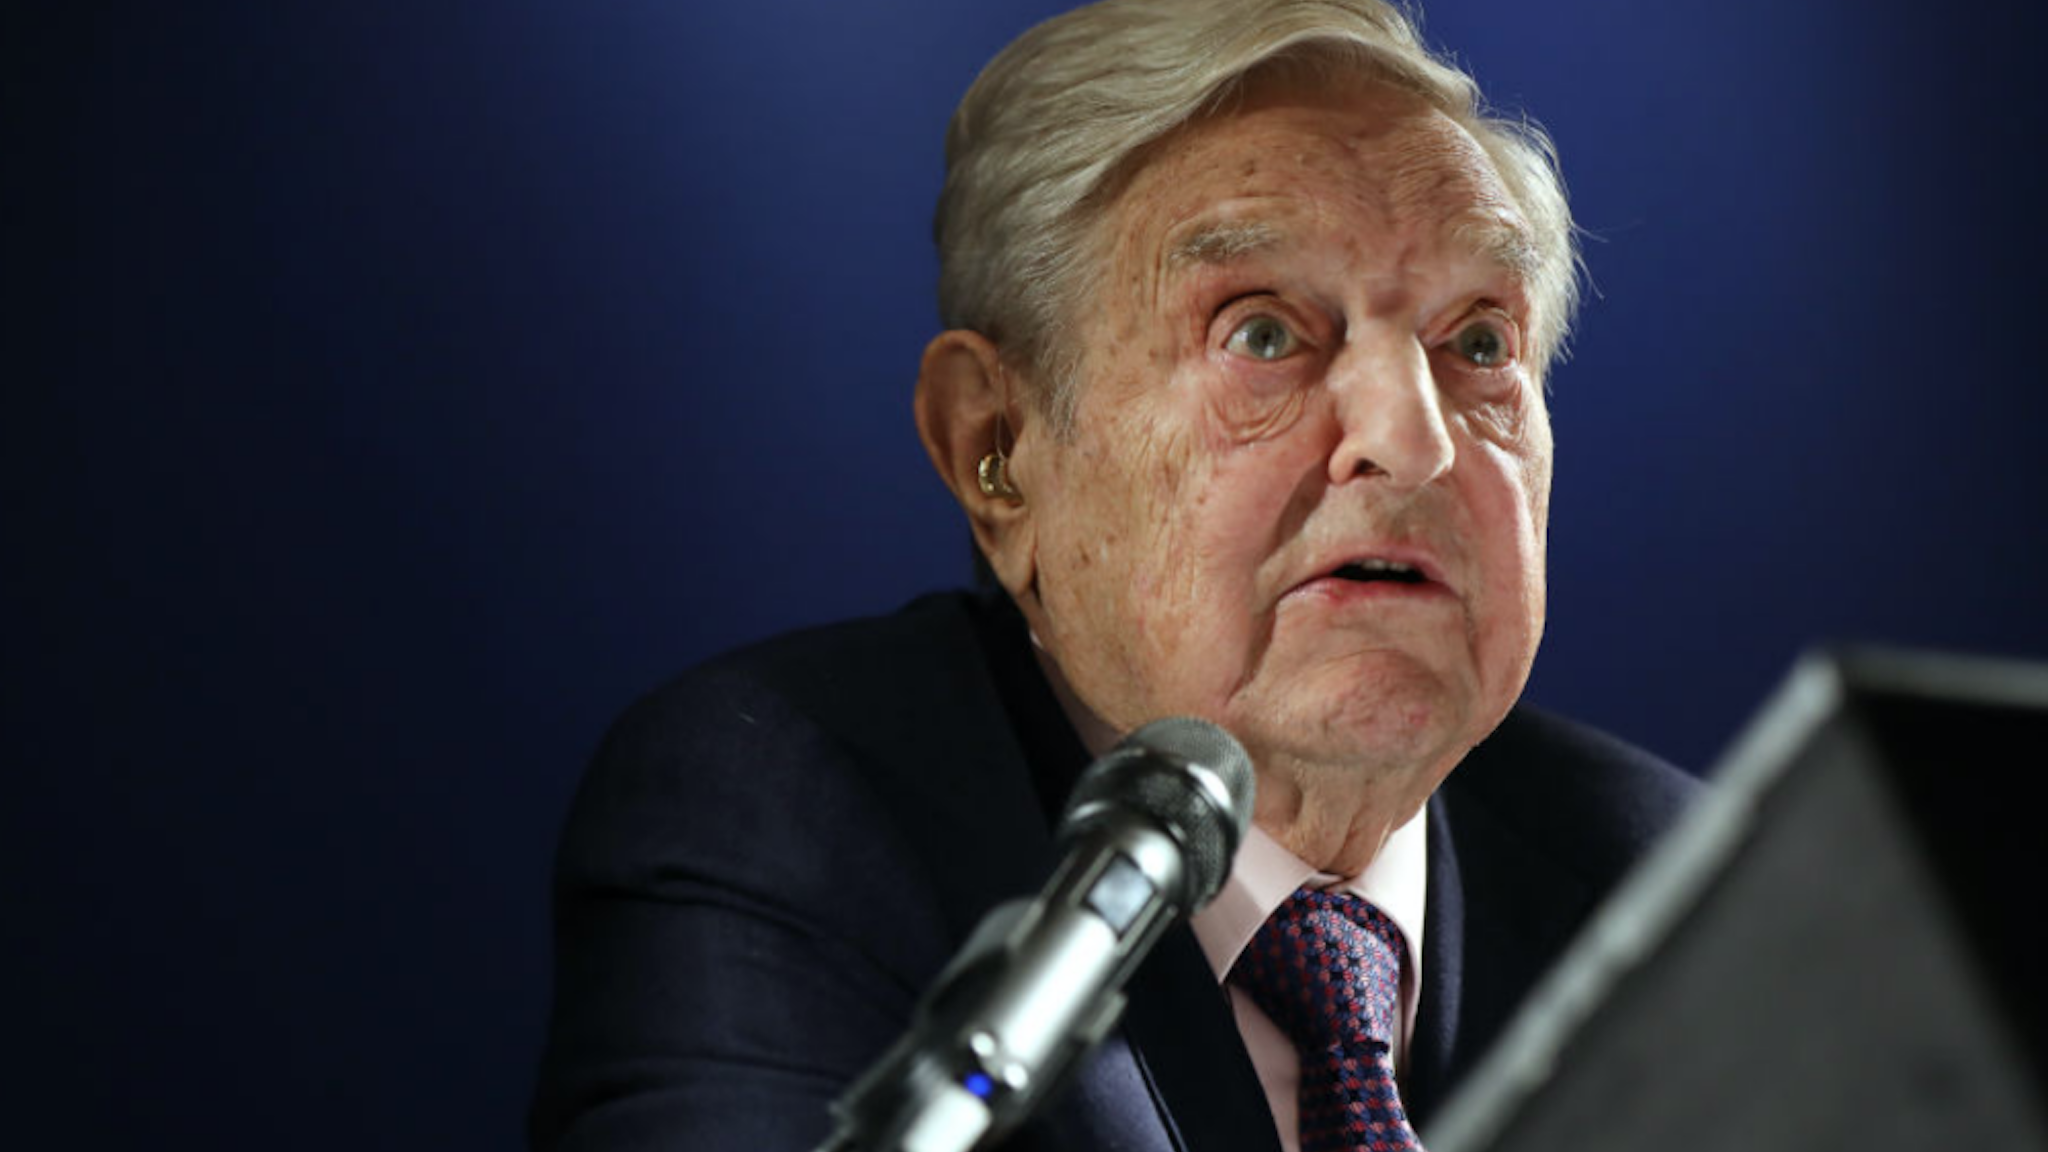 George Soros, billionaire and founder of Soros Fund Management LLC, speaks at an event on day three of the World Economic Forum (WEF) in Davos, Switzerland, on Thursday, Jan. 24, 2019.